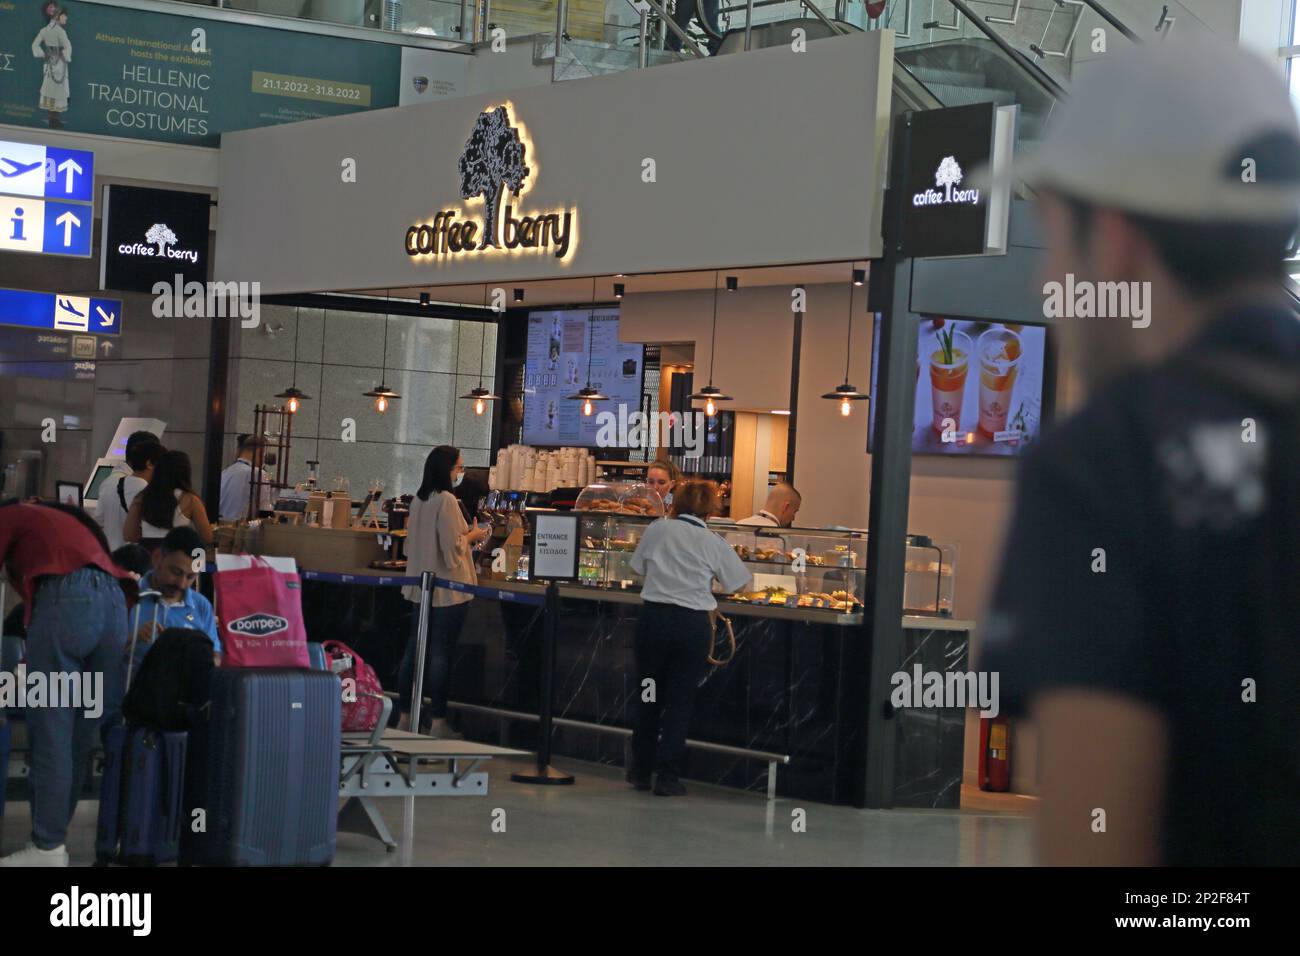 Athens Greece Athens International Airport (AIA) Eleftherios Venizelos People Buying Coffee at Coffee Berry Stock Photo